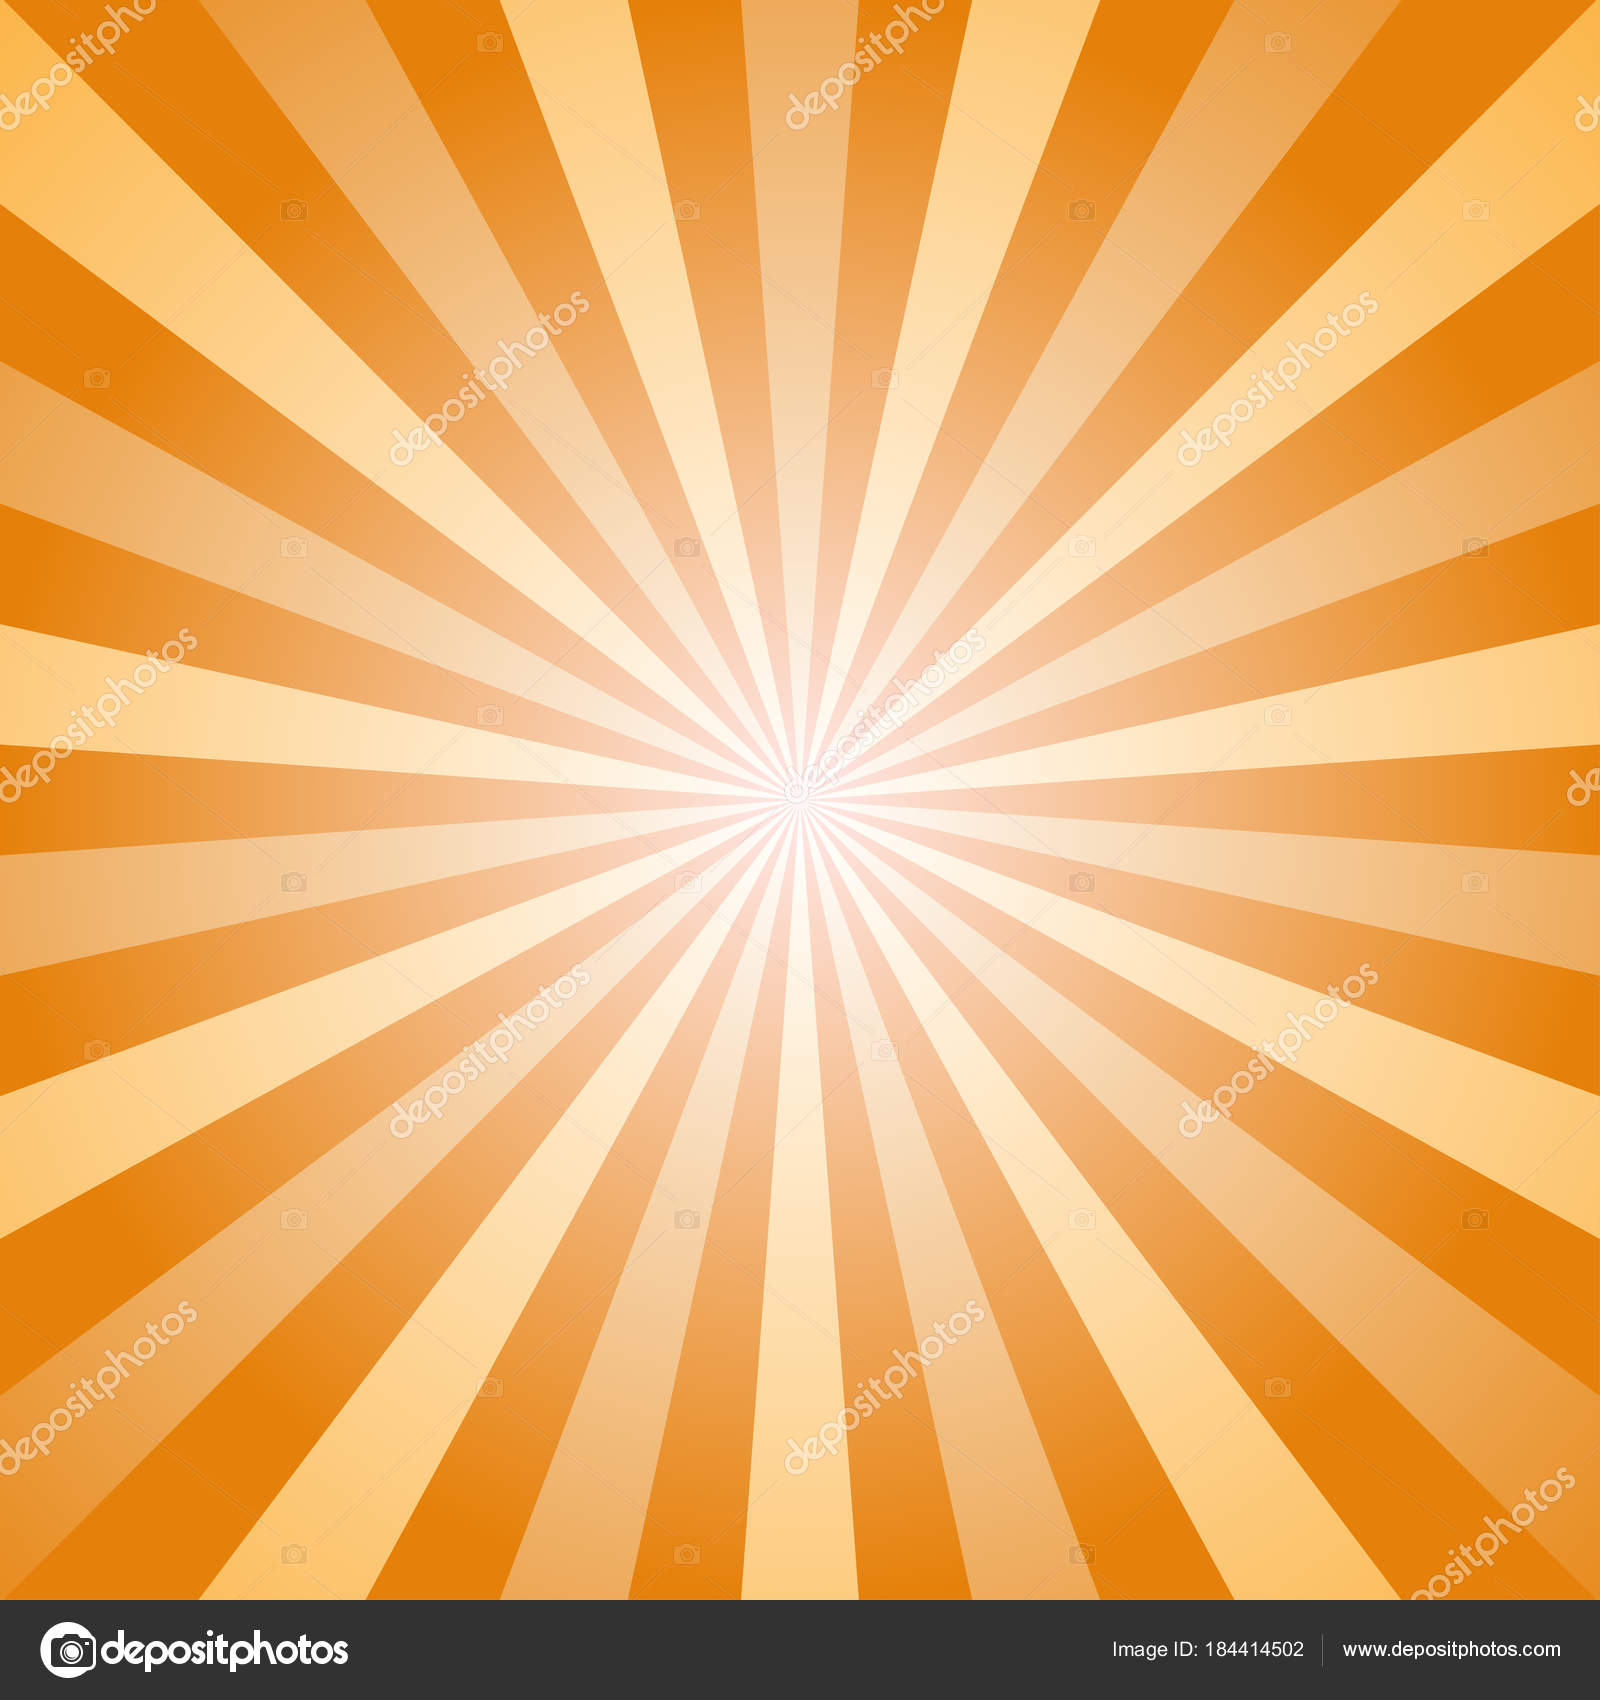 Sunlight abstract background. Orange and gold color burst background ...